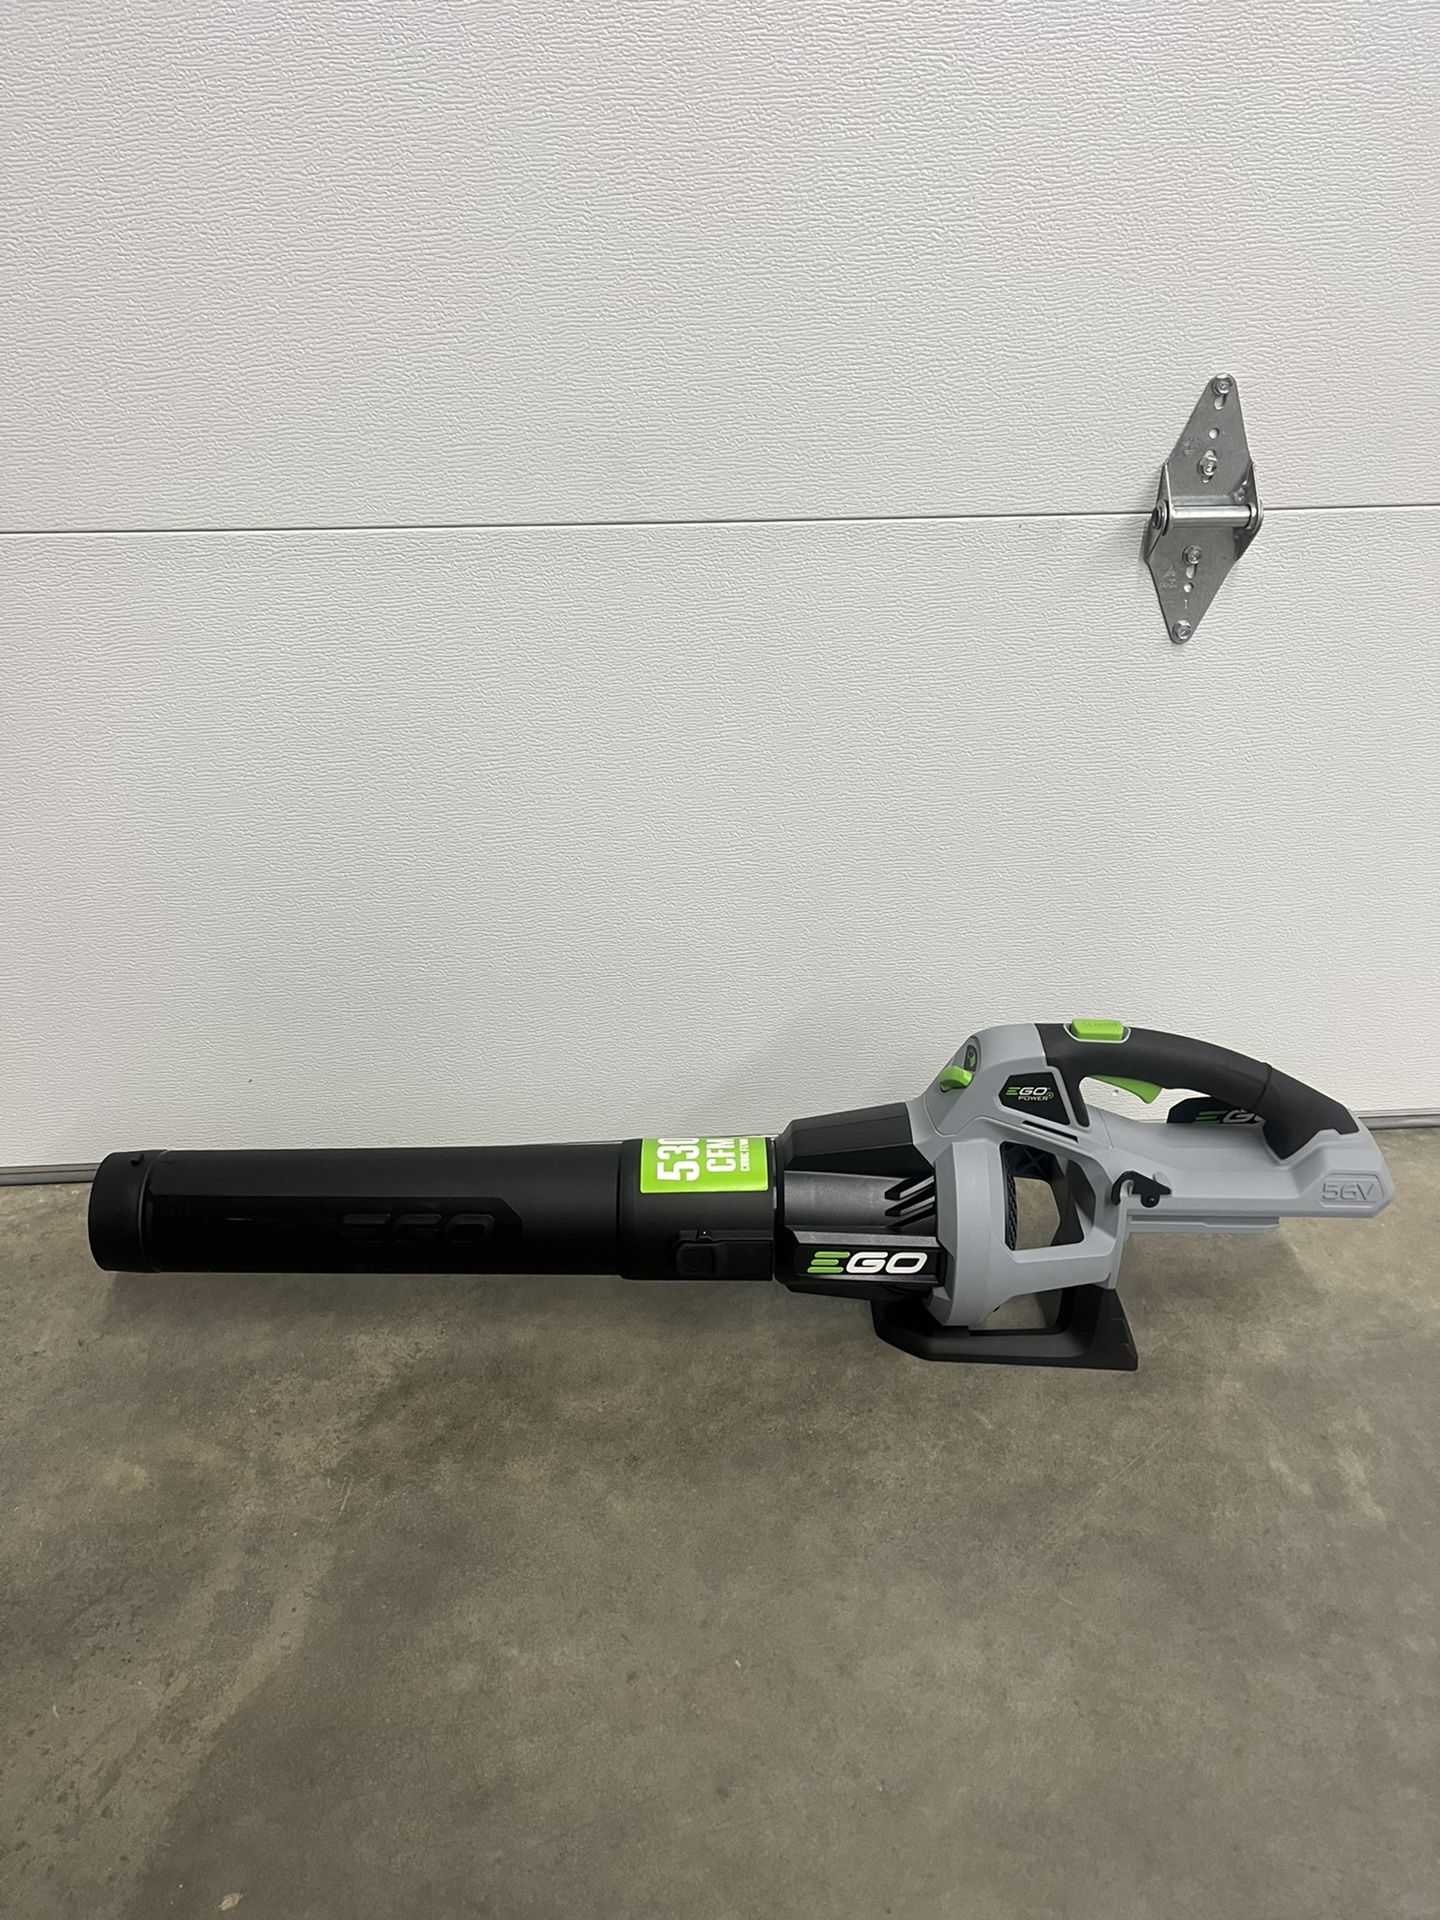 EGO POWER+ 56-volt 530-CFM 110-MPH Battery Handheld Leaf Blower (Battery and Charger Not Included) Model #LB5300